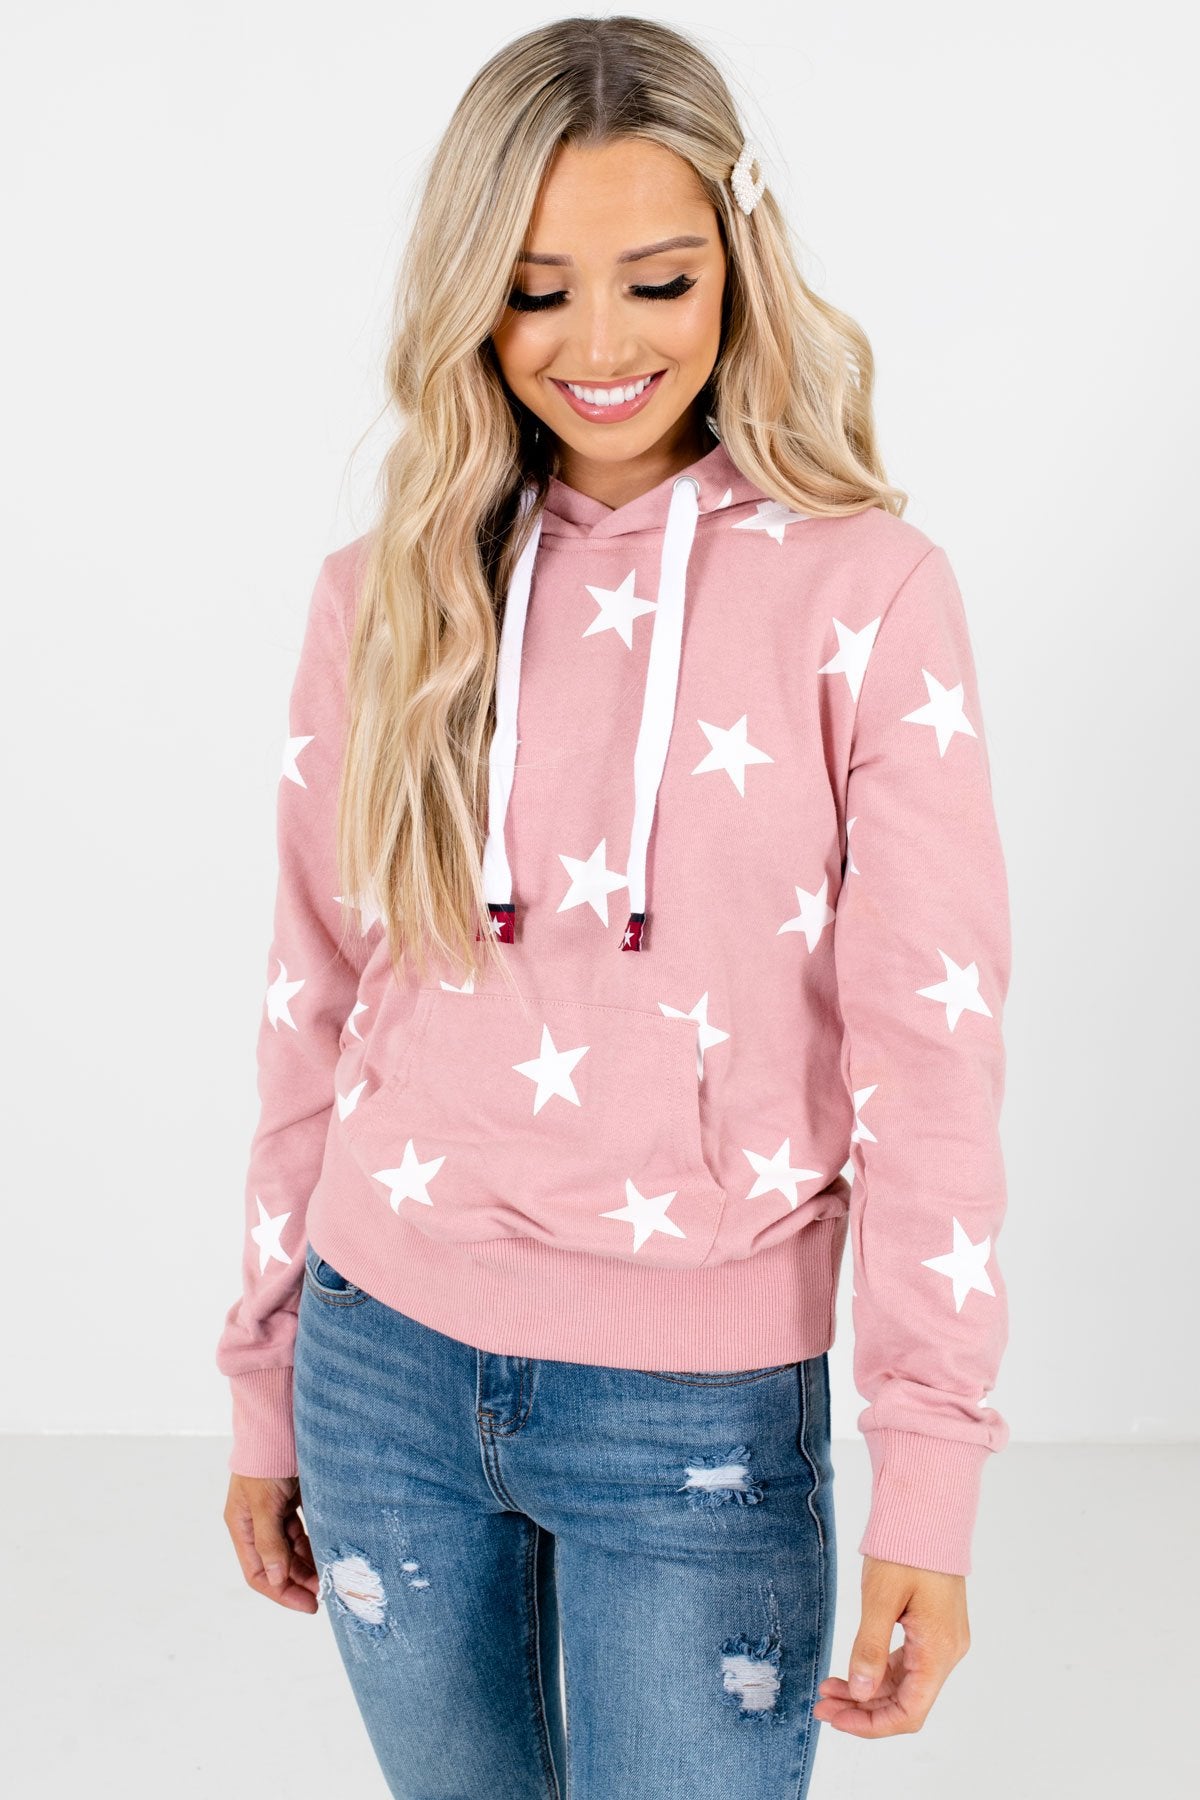 Women’s Pink Casual Everyday Boutique Hoodies